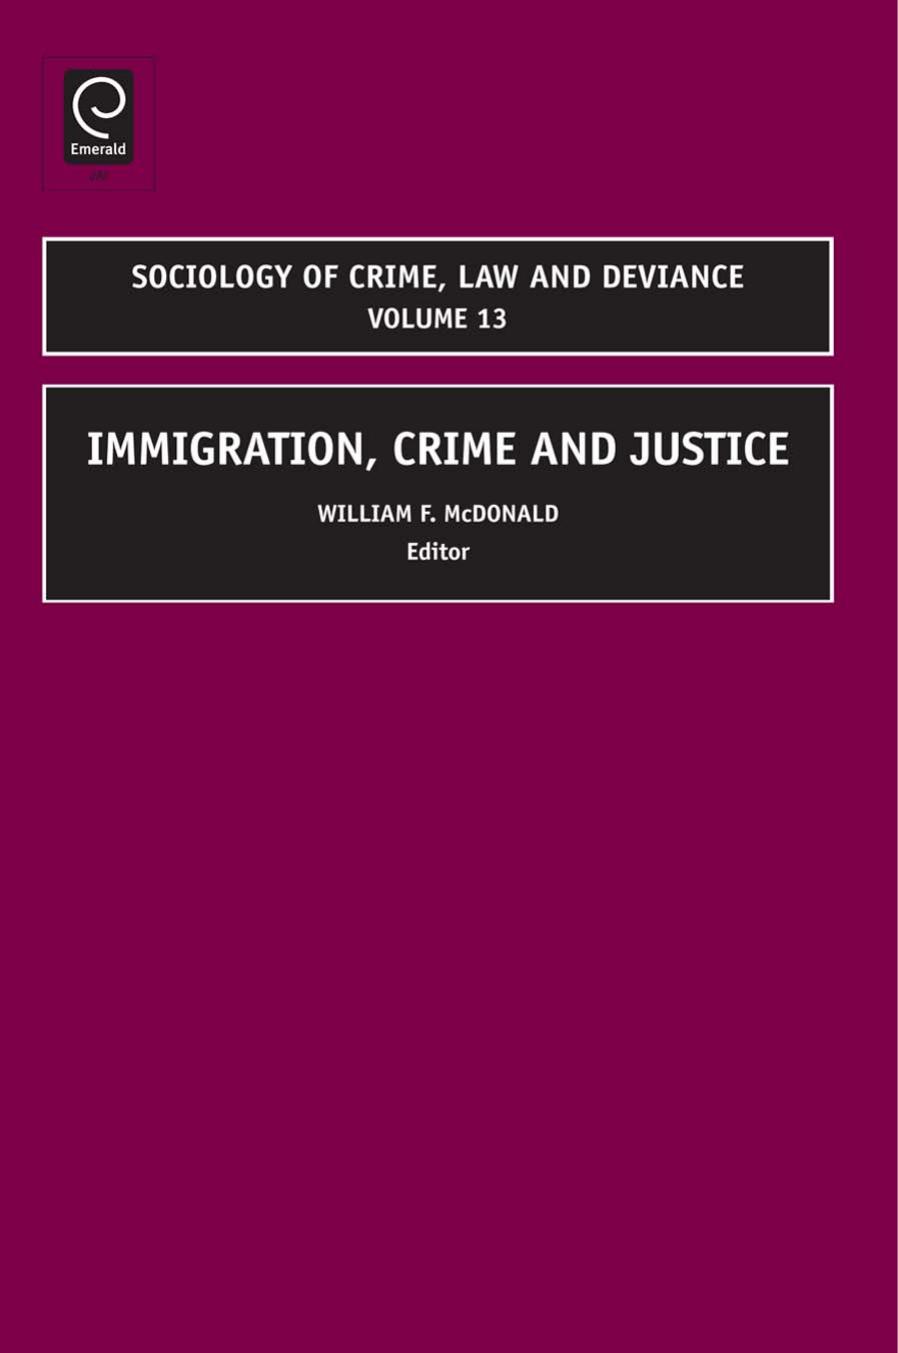 Immigration, Crime and Justice 2009